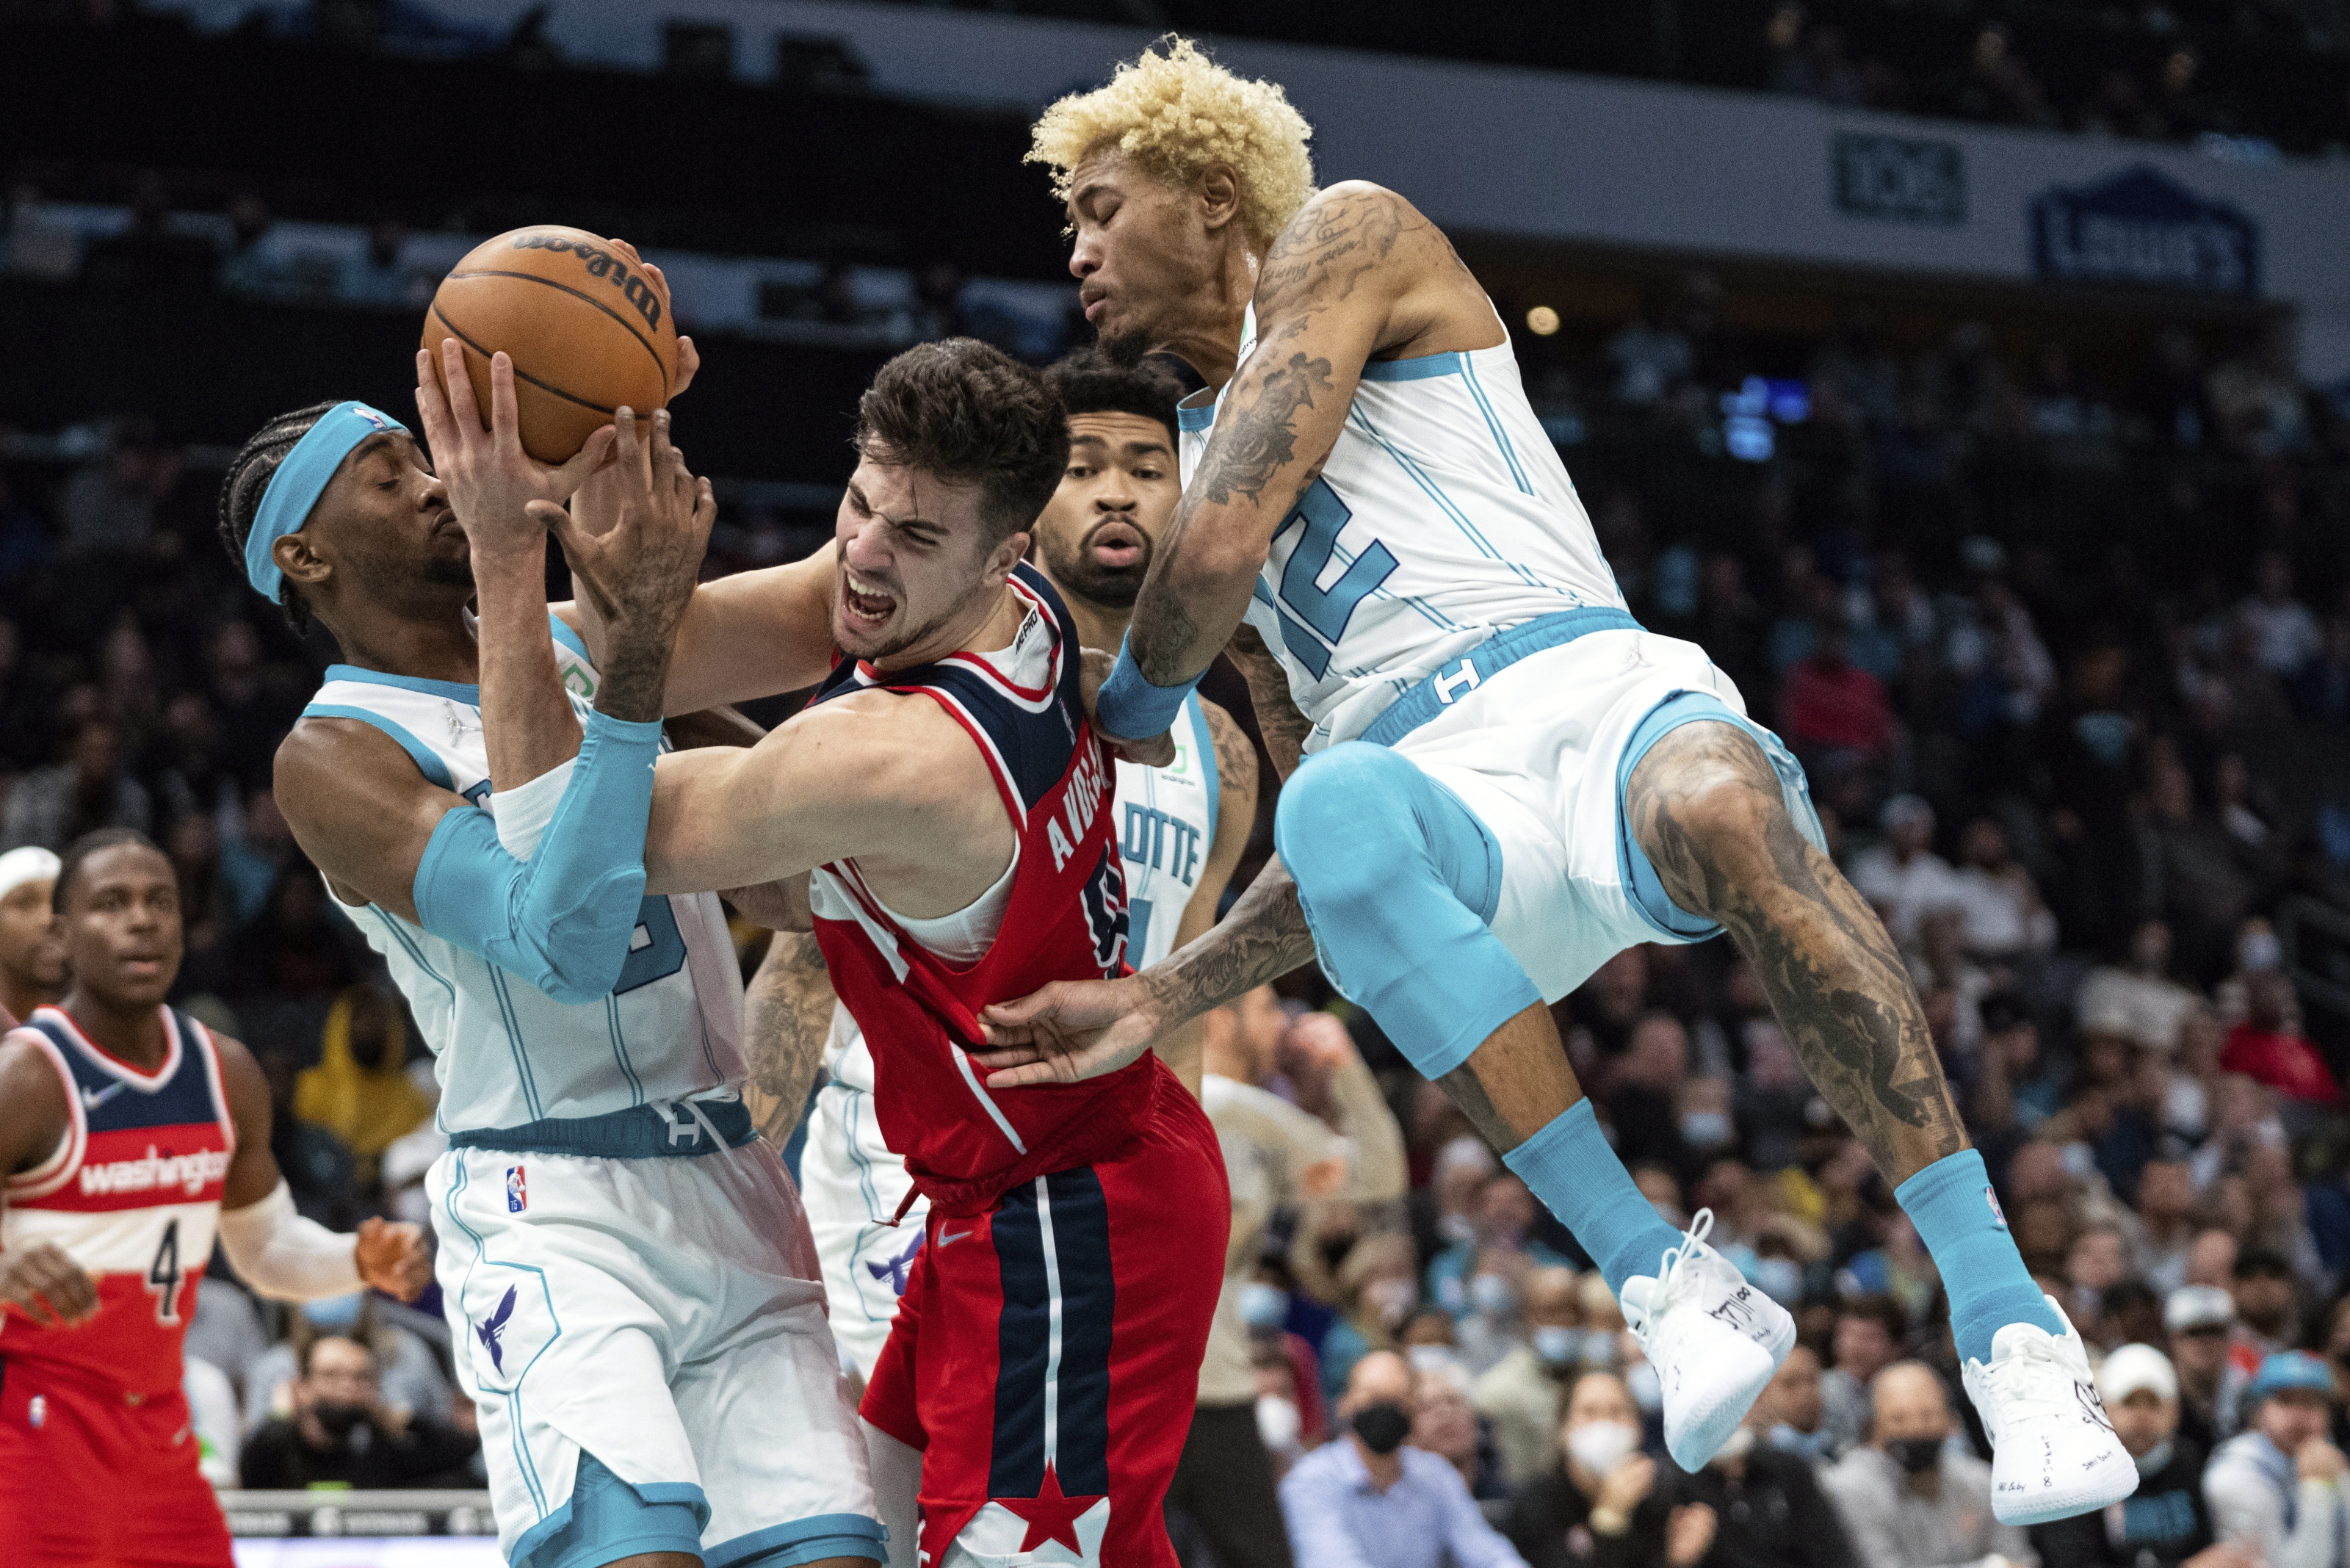 Wizards snap 16-game losing streak with 112-100 victory over Hornets